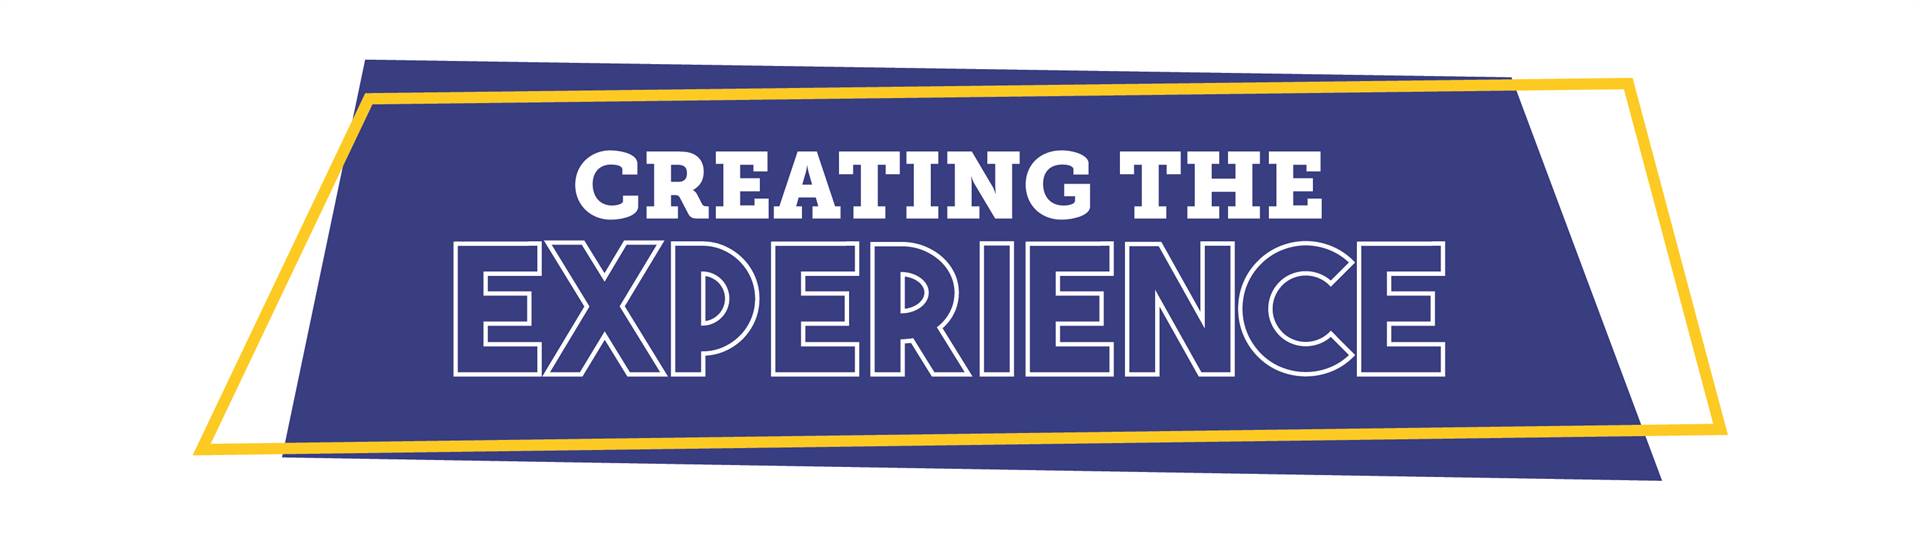 Creating the Experience